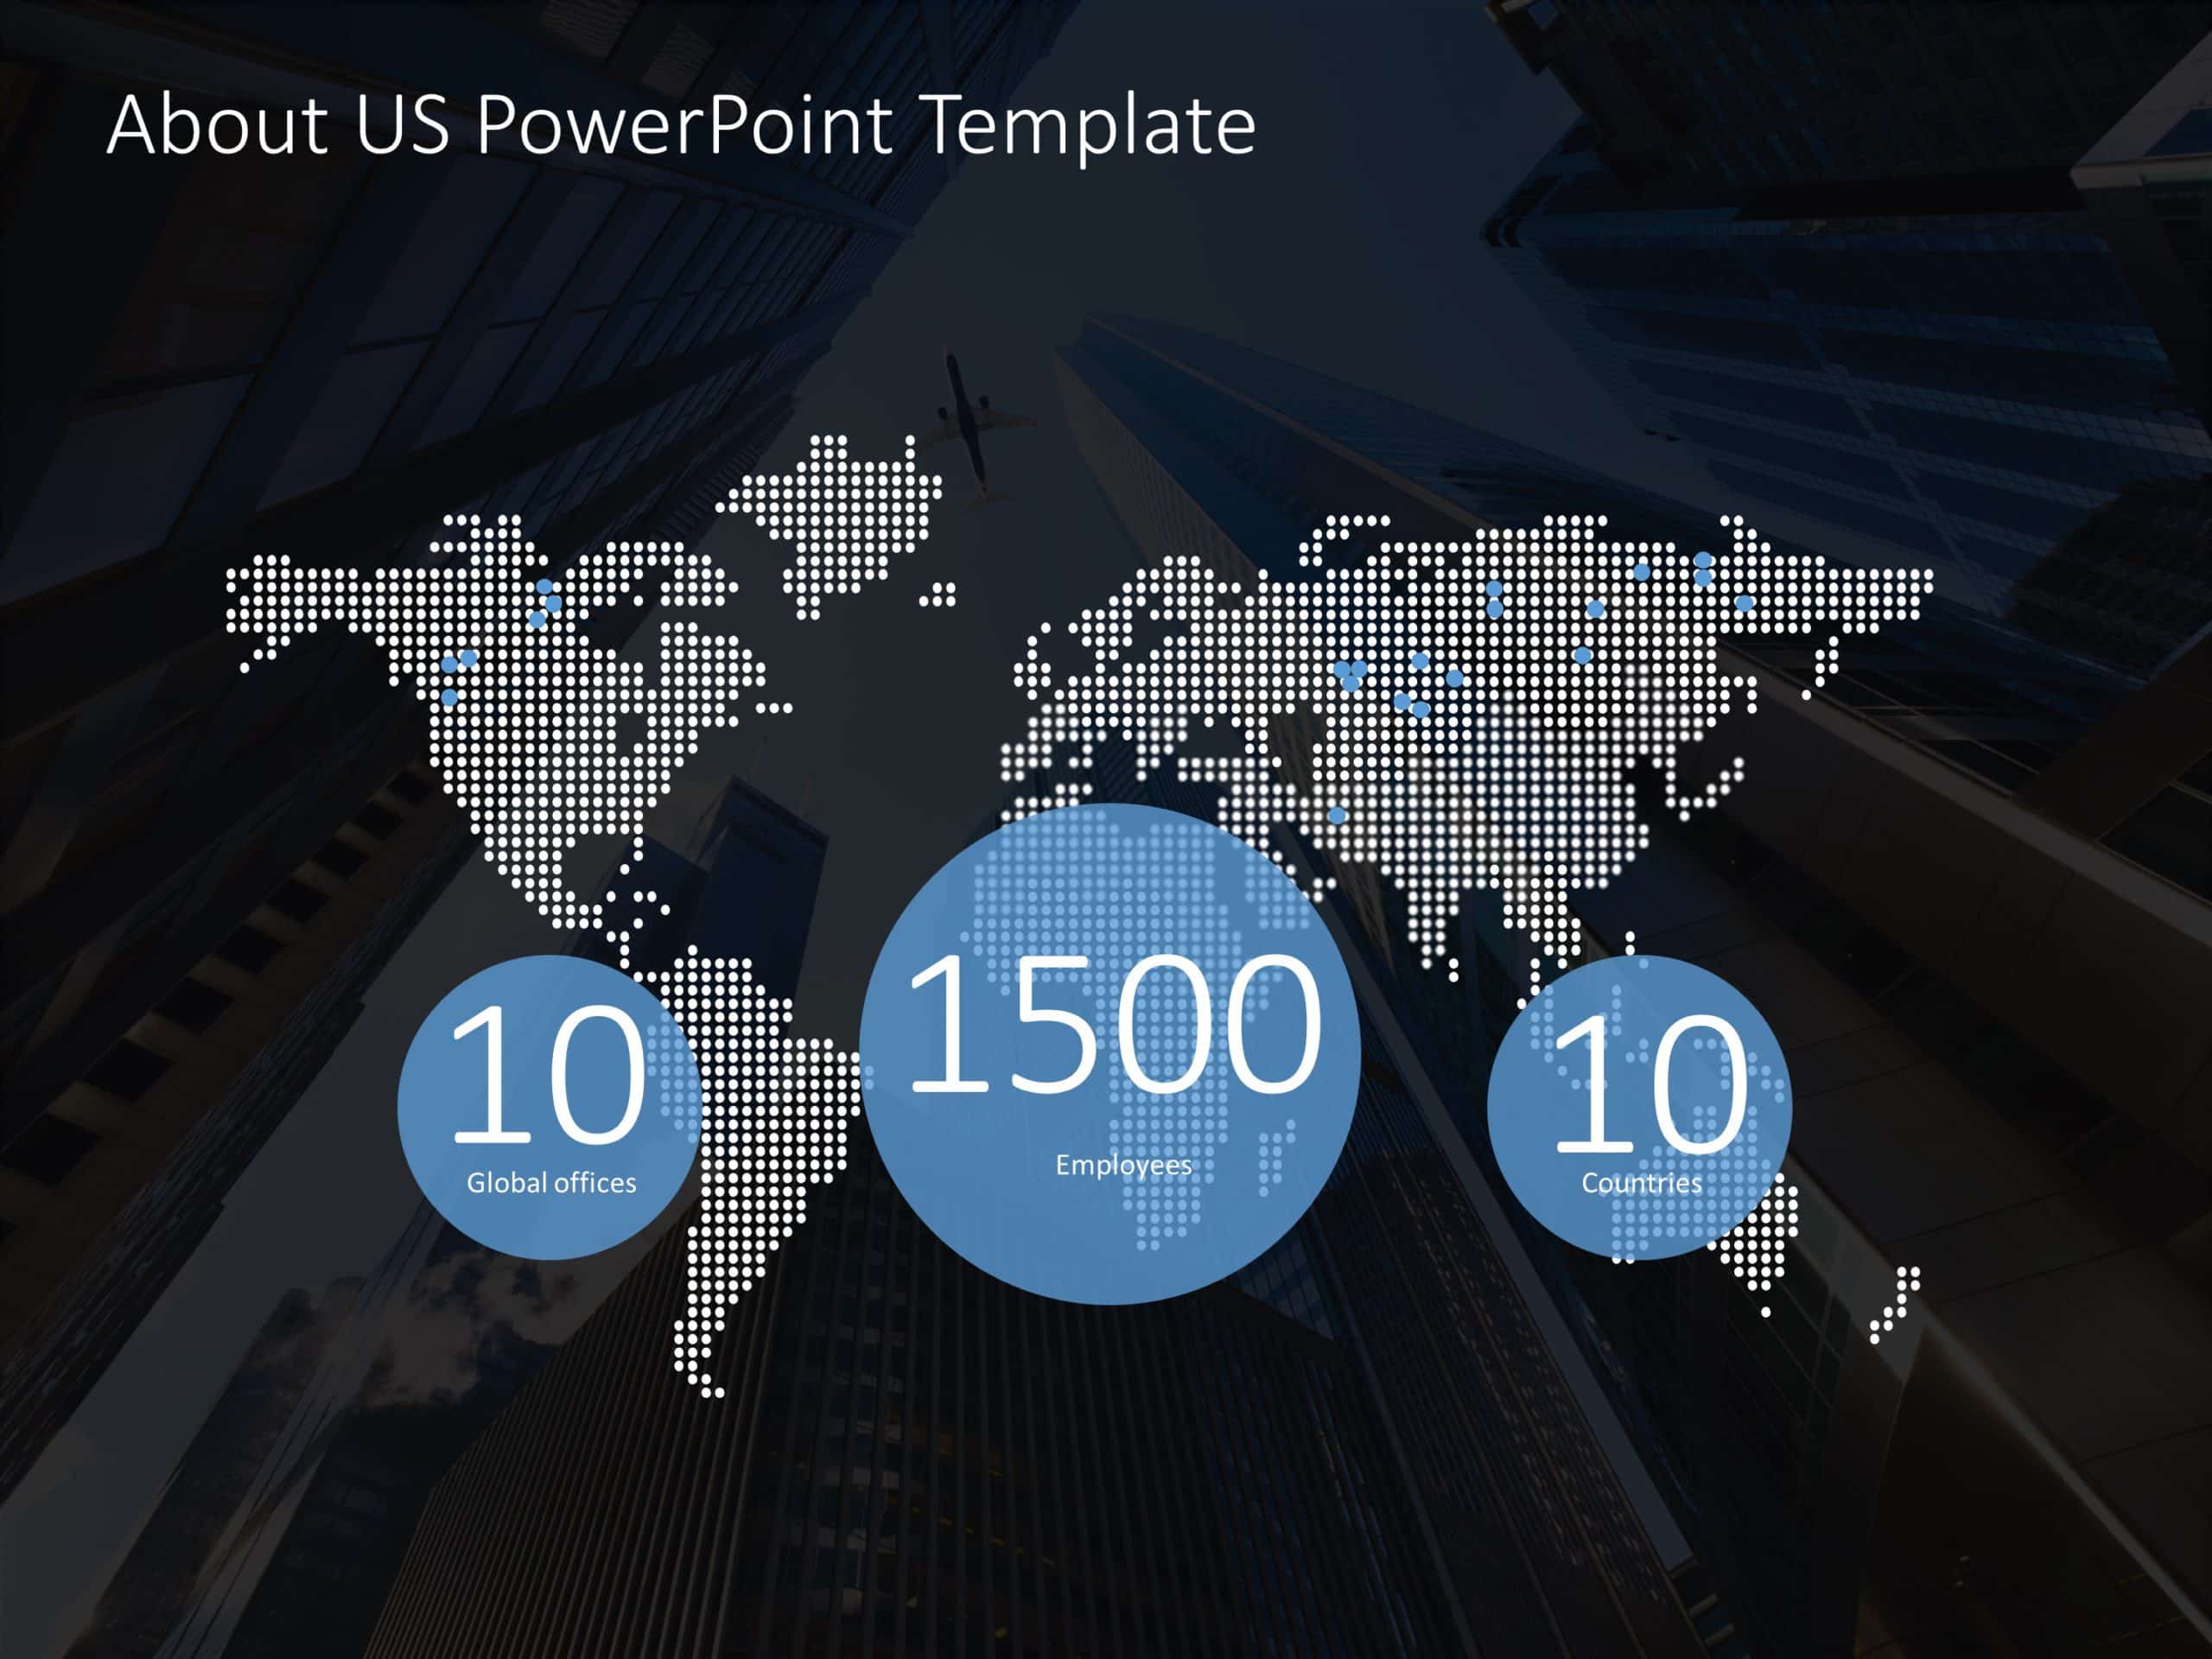 About Us 2 PowerPoint Template